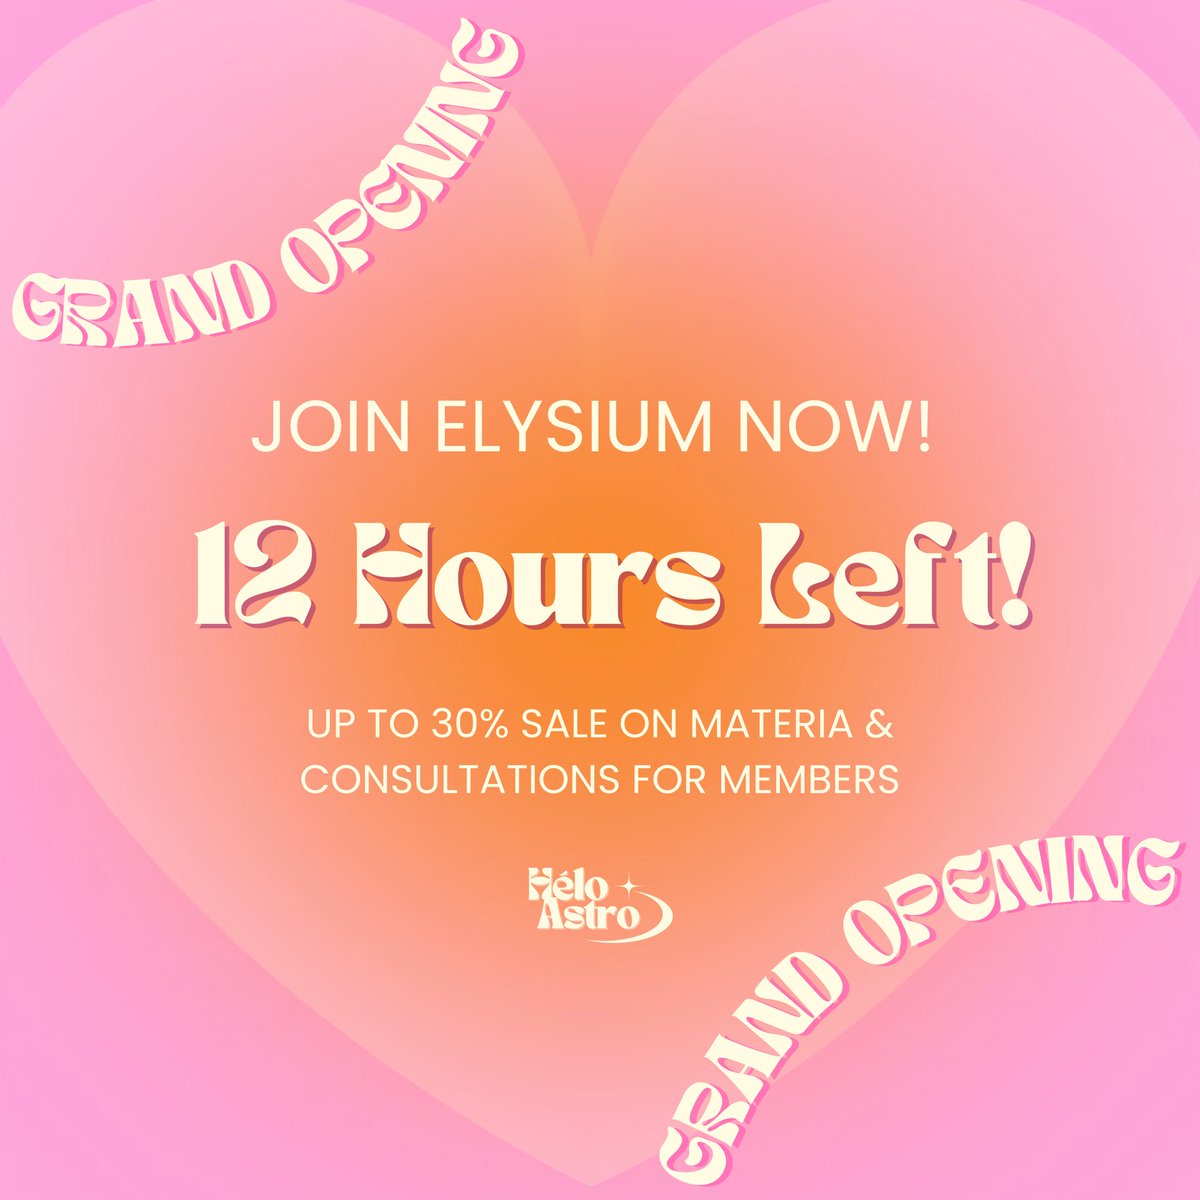 Final call for the Elysium Opening Sale!✨

There's less than 12 HOURS left to join Elysium, my monthly astro membership & receive up to 30% off ALL counsultations & talismanic materia!

Join now to access all the benefits of Elysium *and* these exclusive perks! Sale ends soon 💕